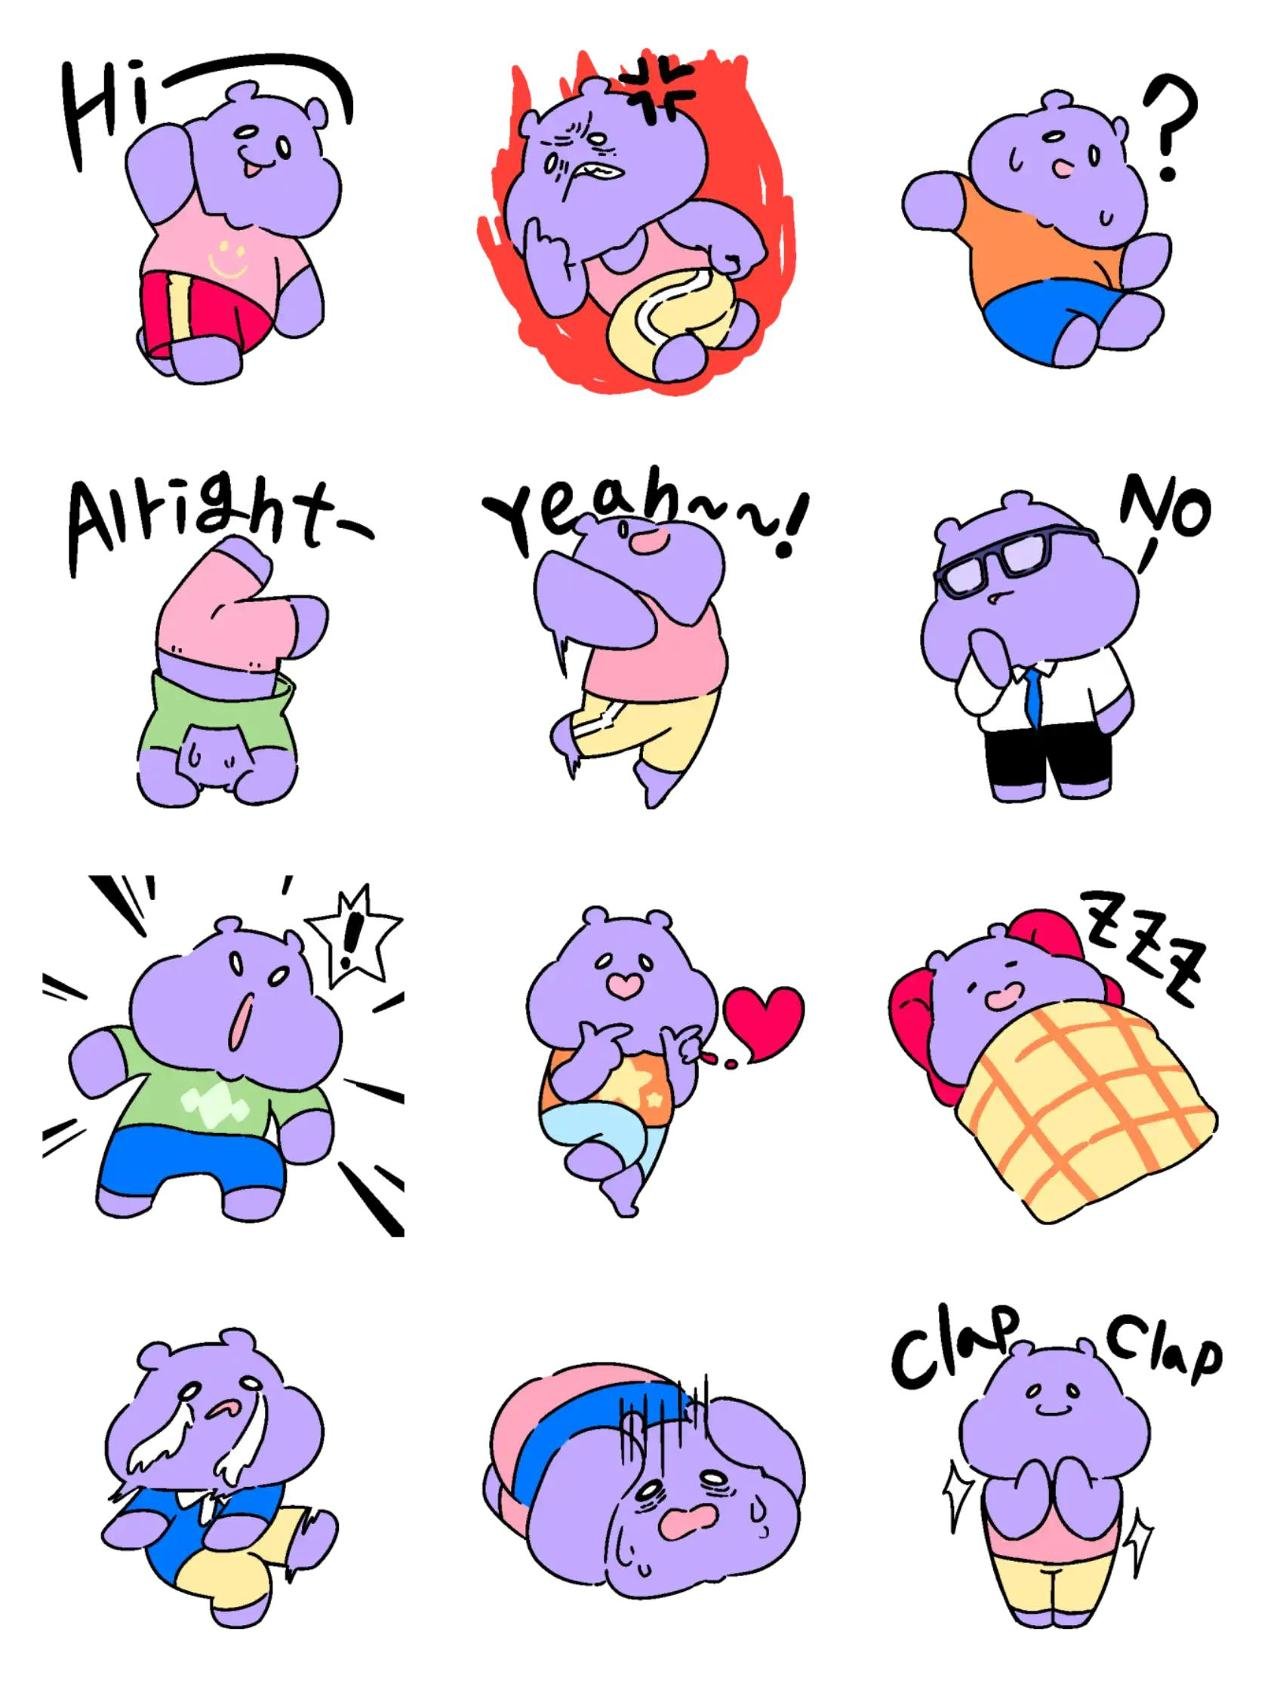 Hippo, HEEEPPO! [2] Animation/Cartoon,Animals sticker pack for Whatsapp, Telegram, Signal, and others chatting and message apps